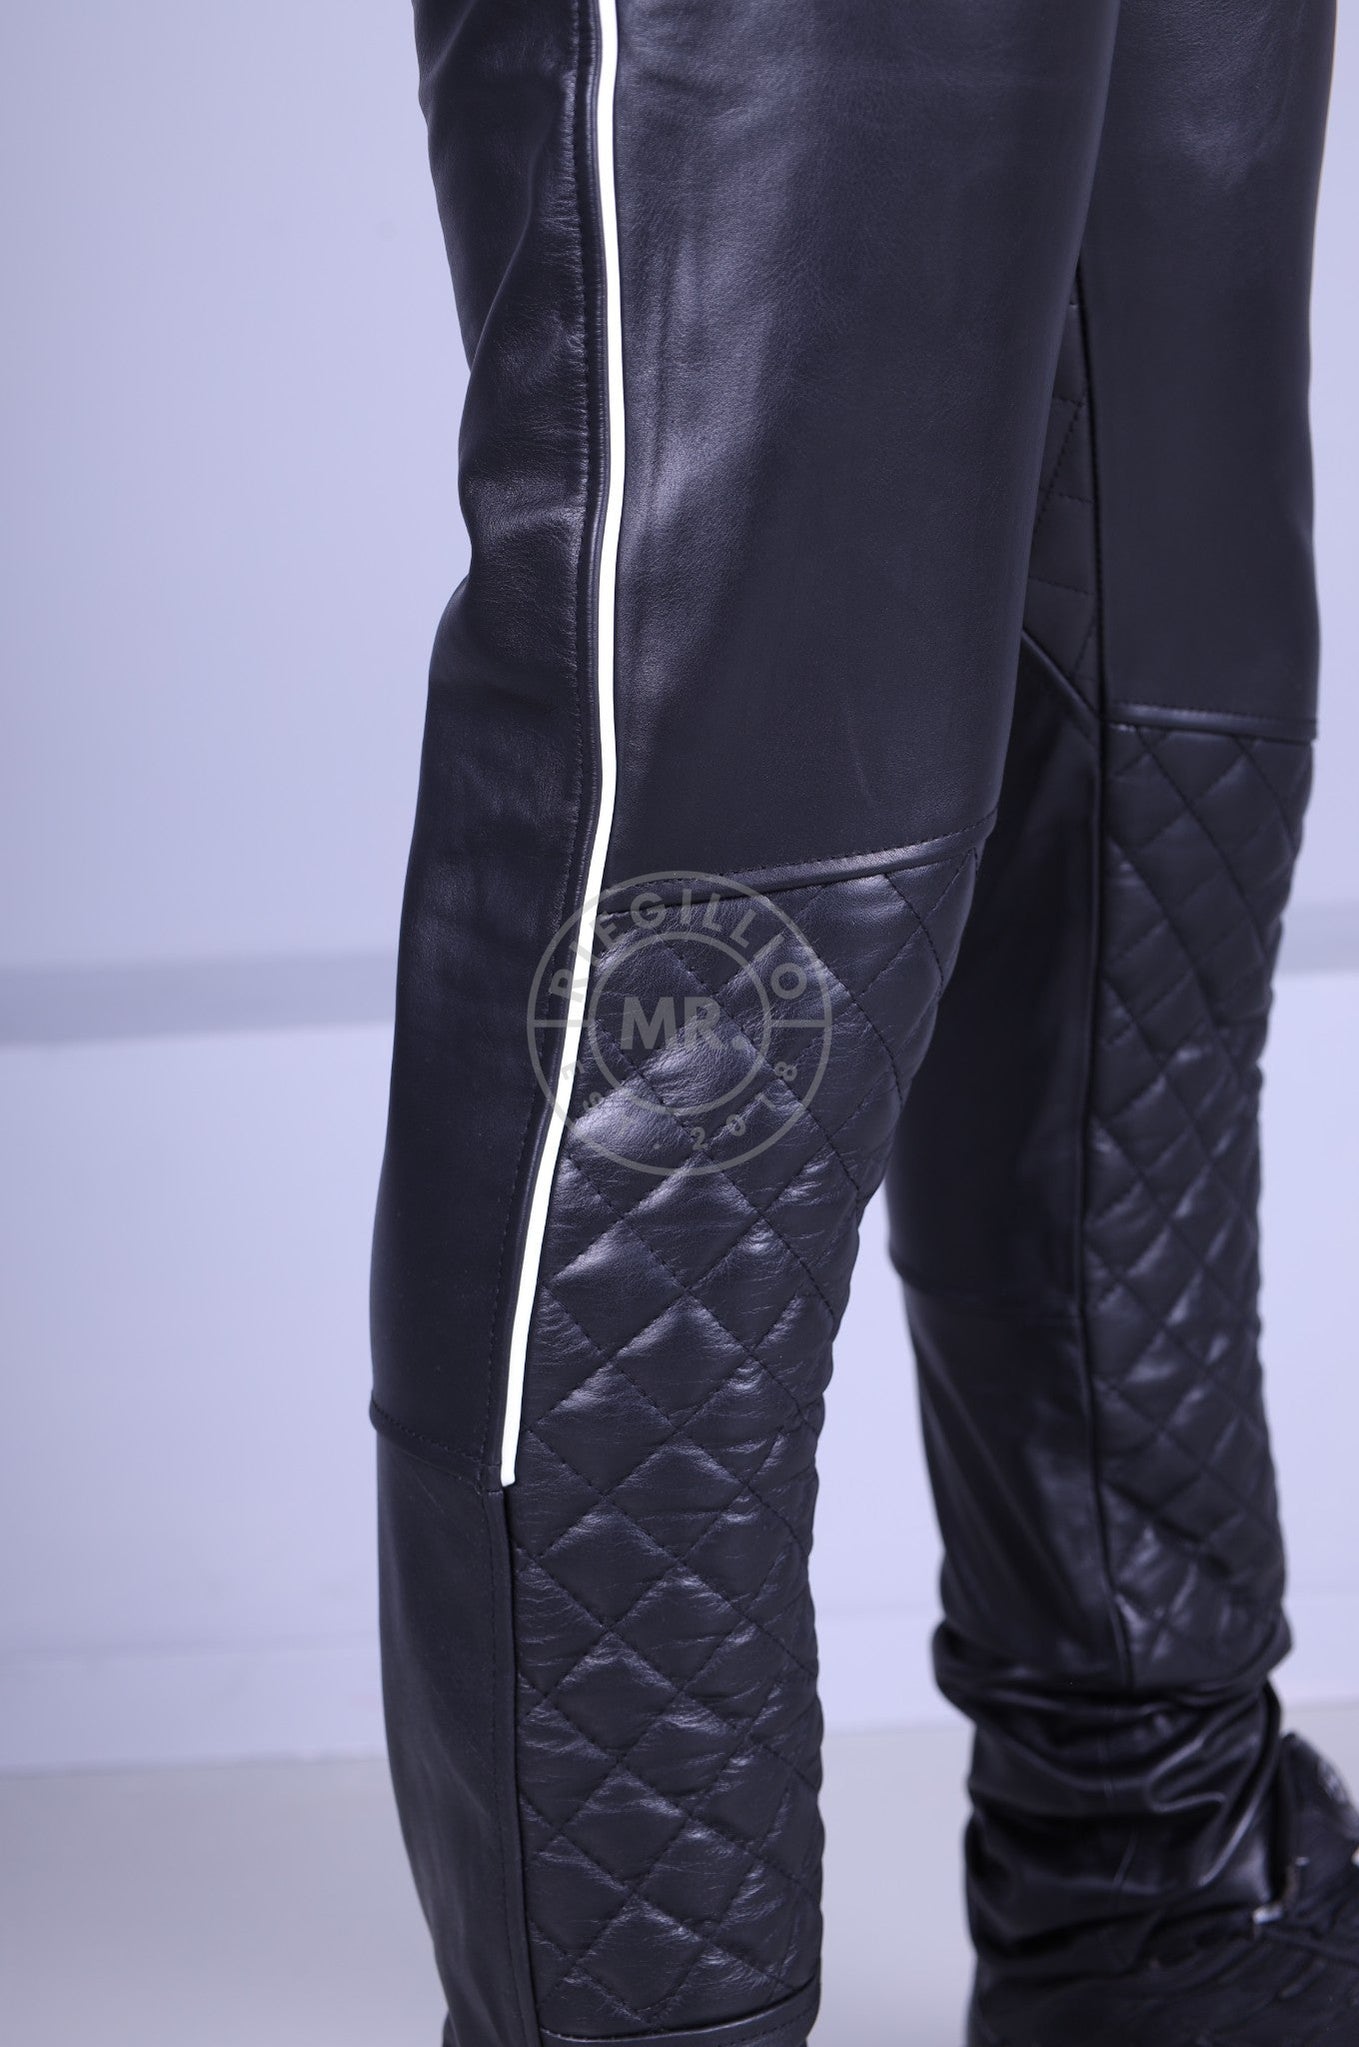 Padded Leather Pants - White Piping at MR. Riegillio